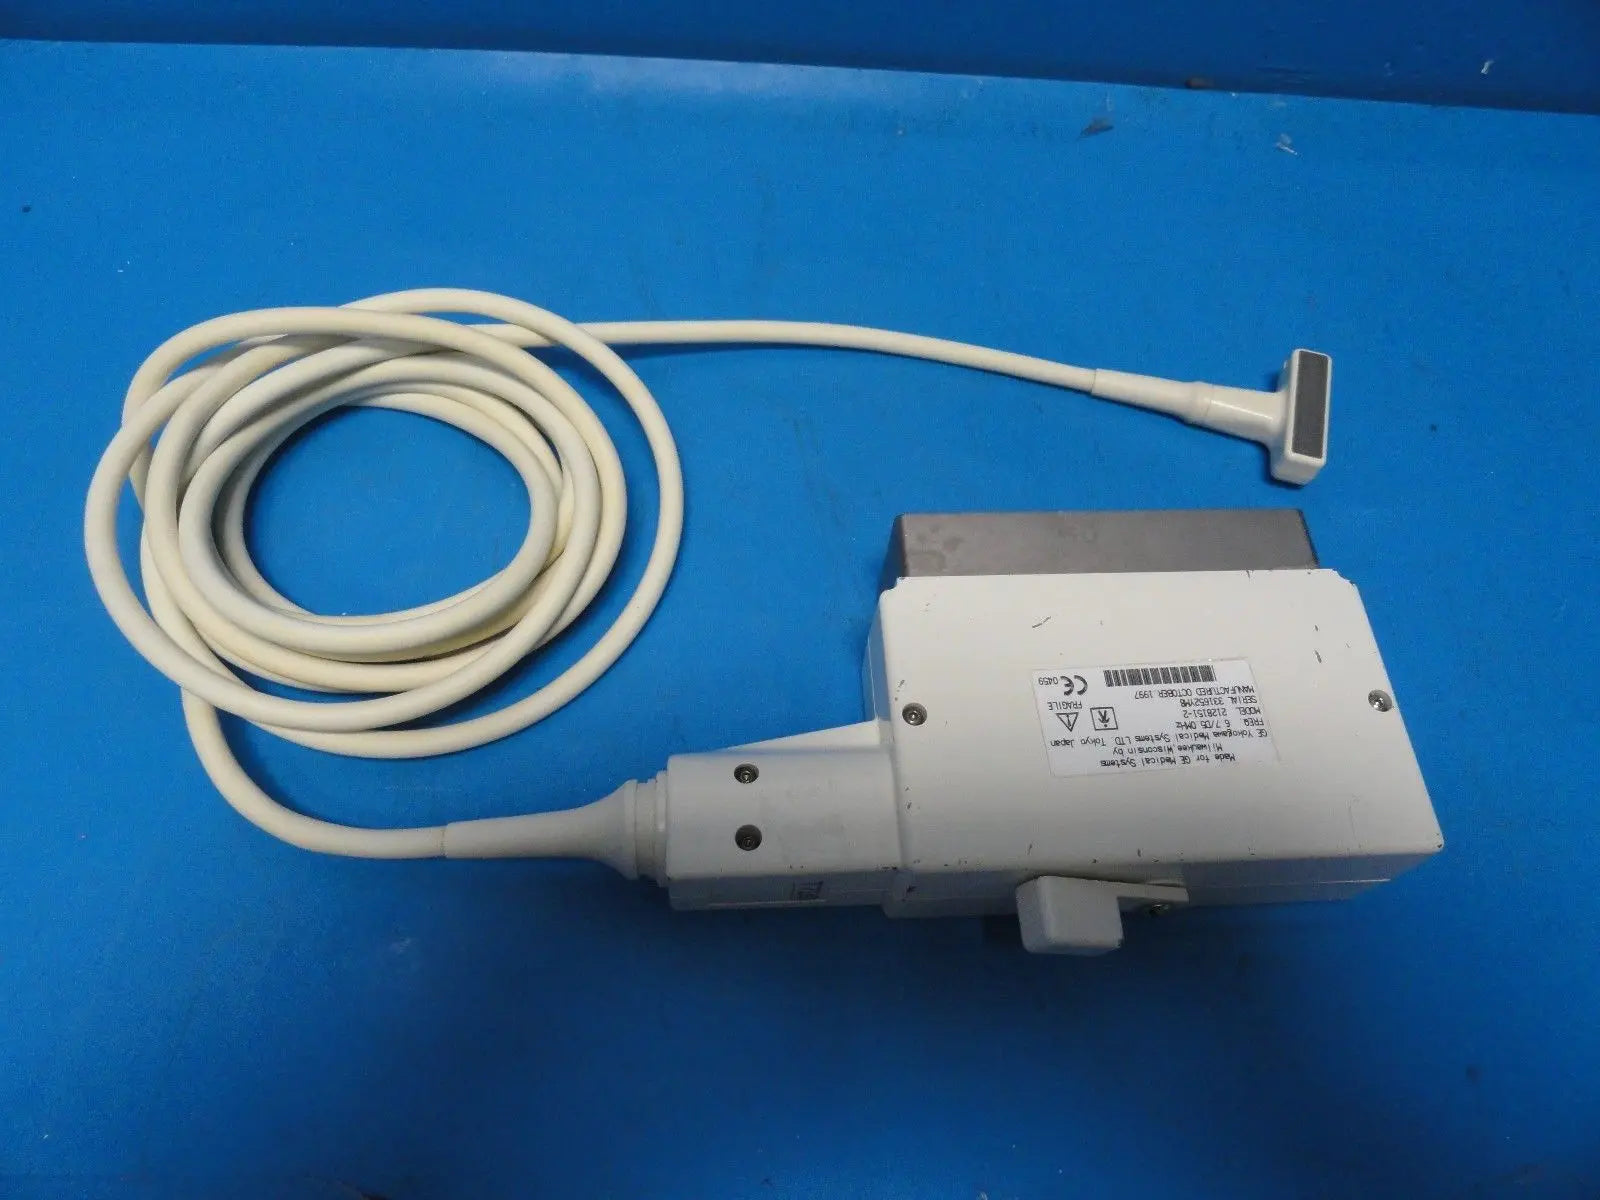 GE T739 P/N 2128151-2 6.7/D5.0 MHz  Linear Array Ultrasound Transducer  (9853)